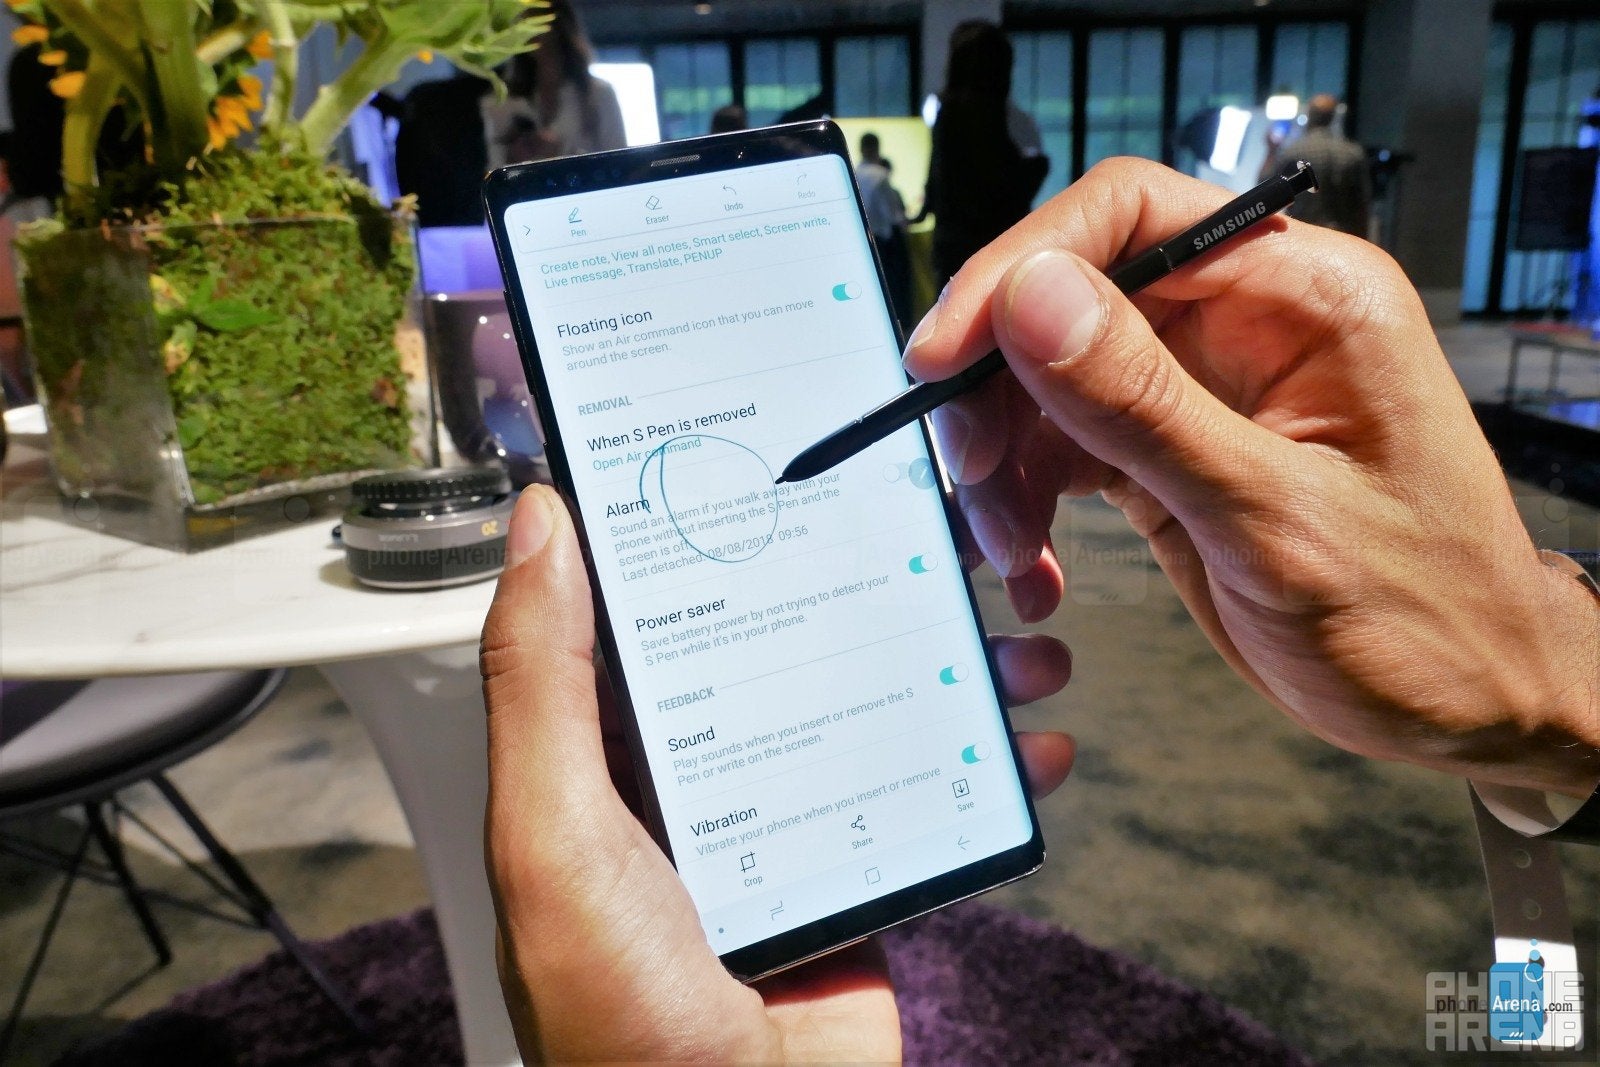 Samsung Galaxy Note 9 hands-on: More of everything!